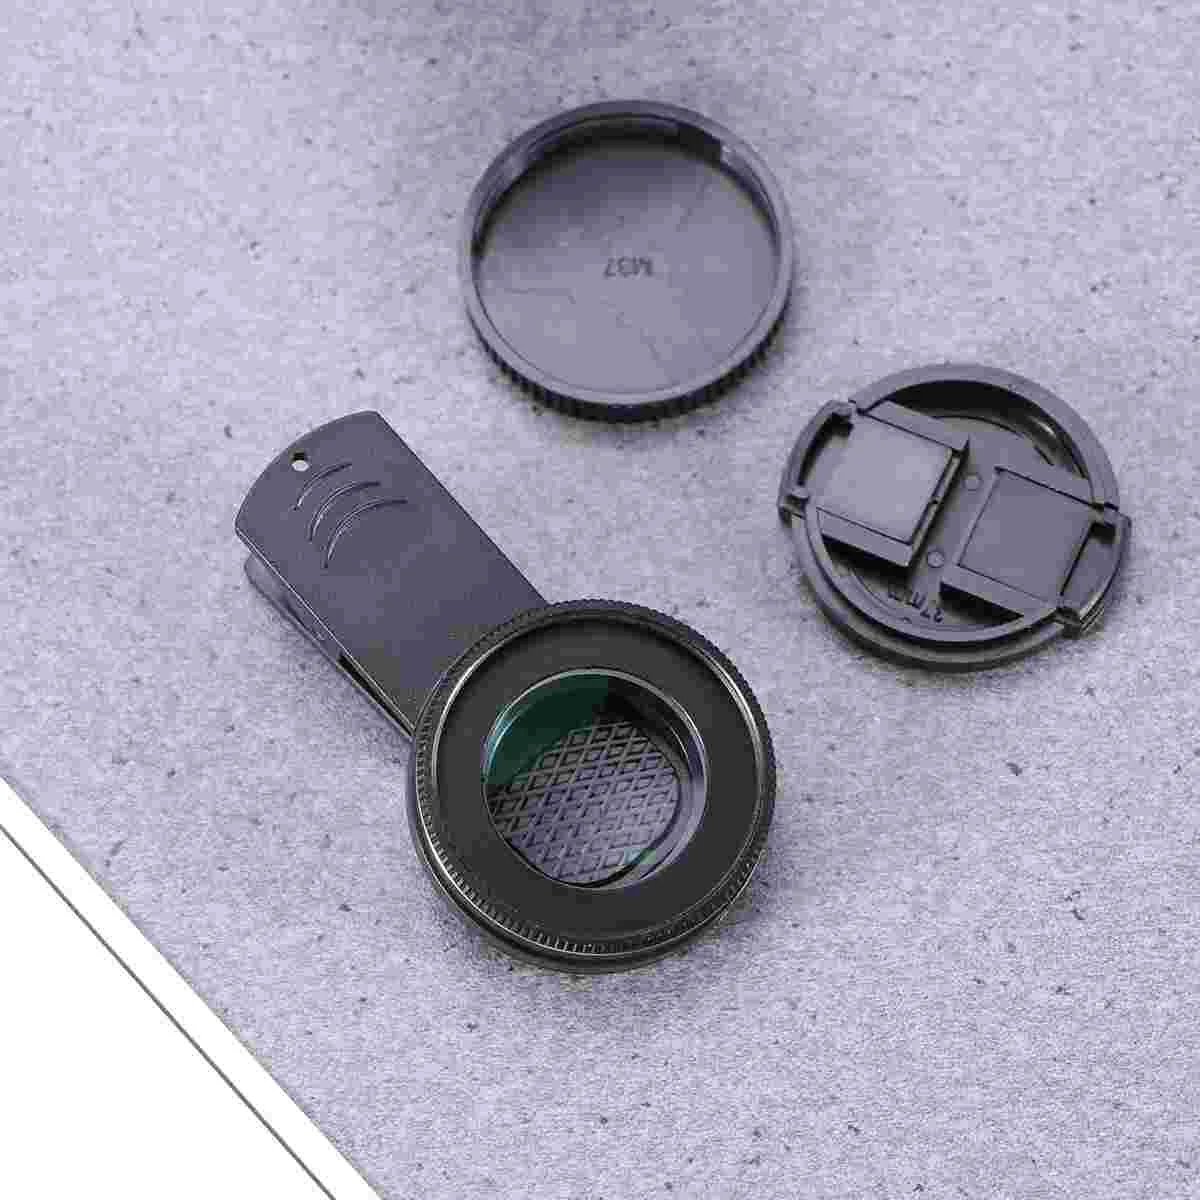 Lenscamera Cellcellphone Fisheye Macro Eyesmartphone 15Xtelephoto Clip Attachments Magnifying Optic External Wide Angle